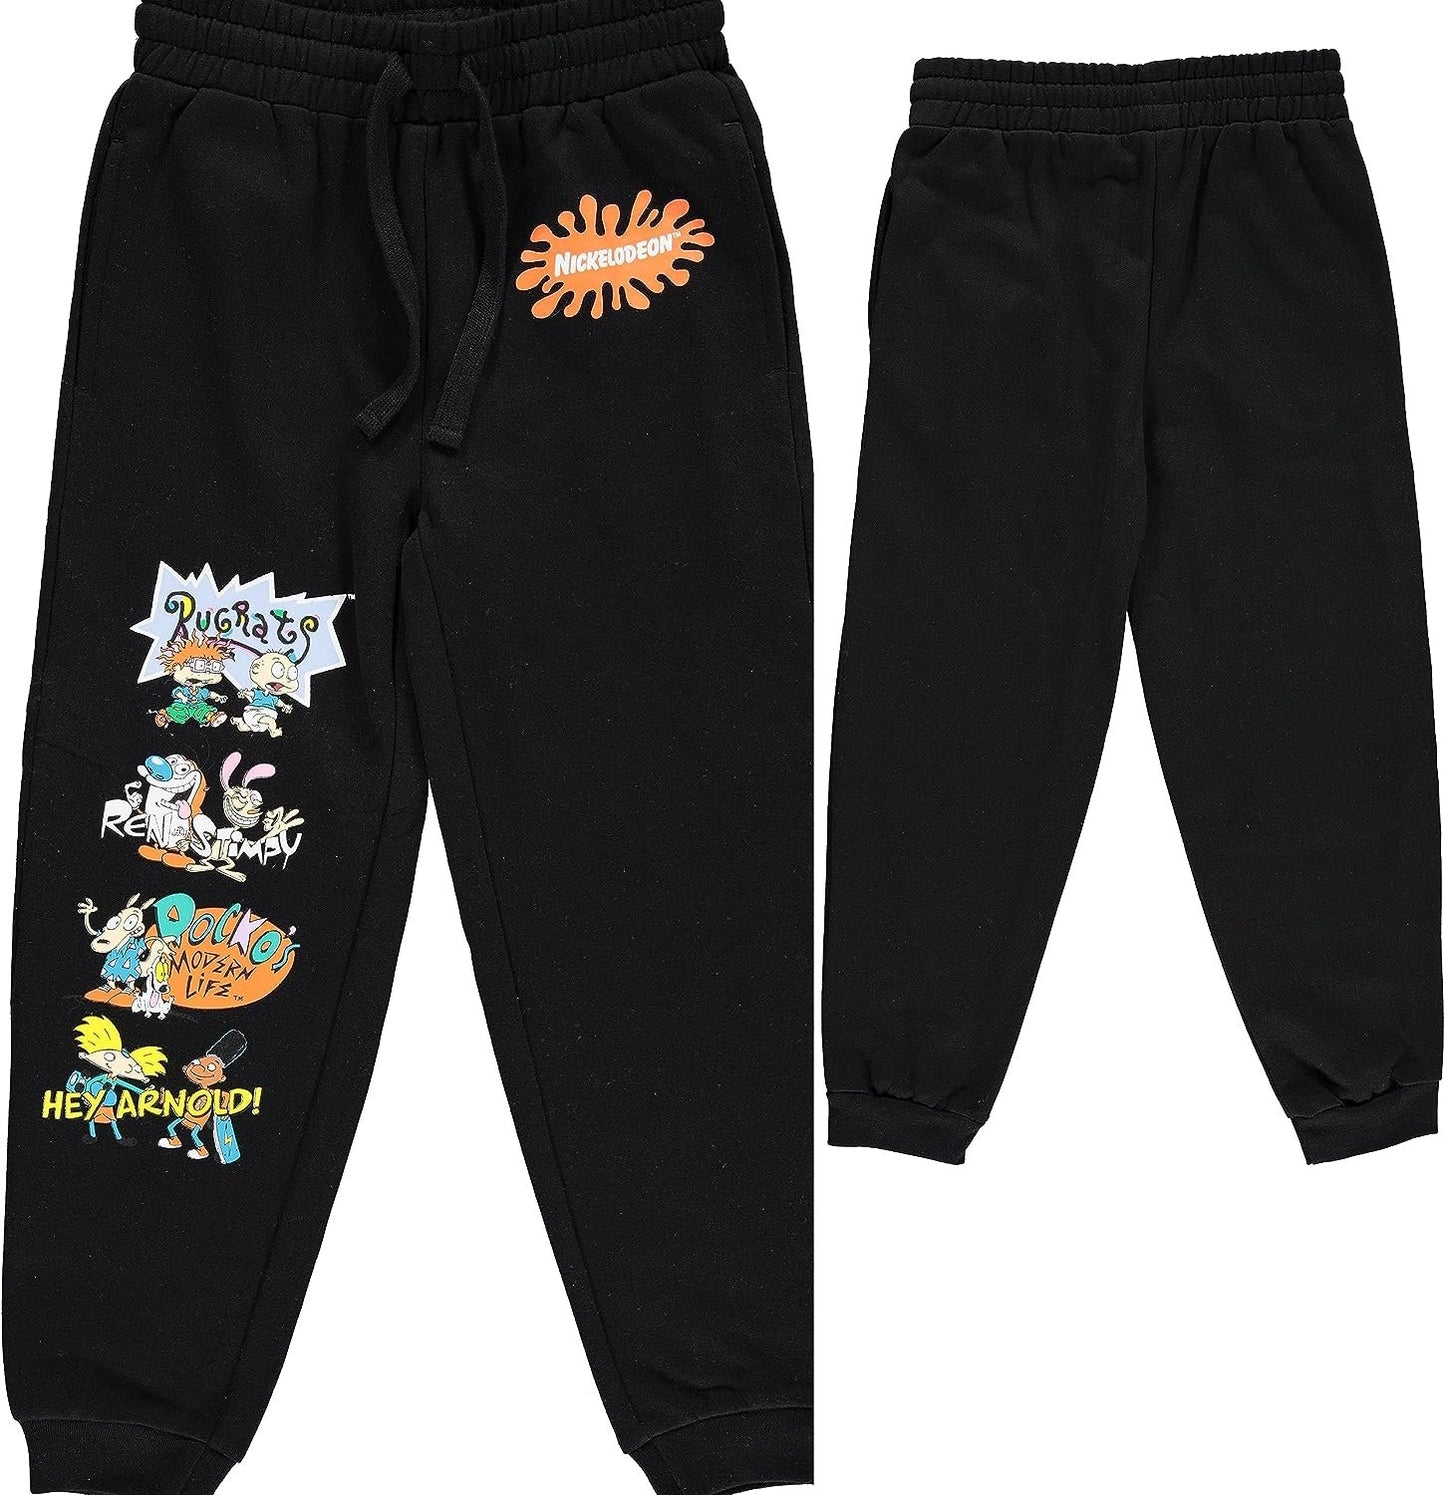 Nickelodeon Boys Jogger Sweatpants - Rugrats, Ren and Stimpy, Hey Arnold and Rocko's Modern Life - Sizes 4-20